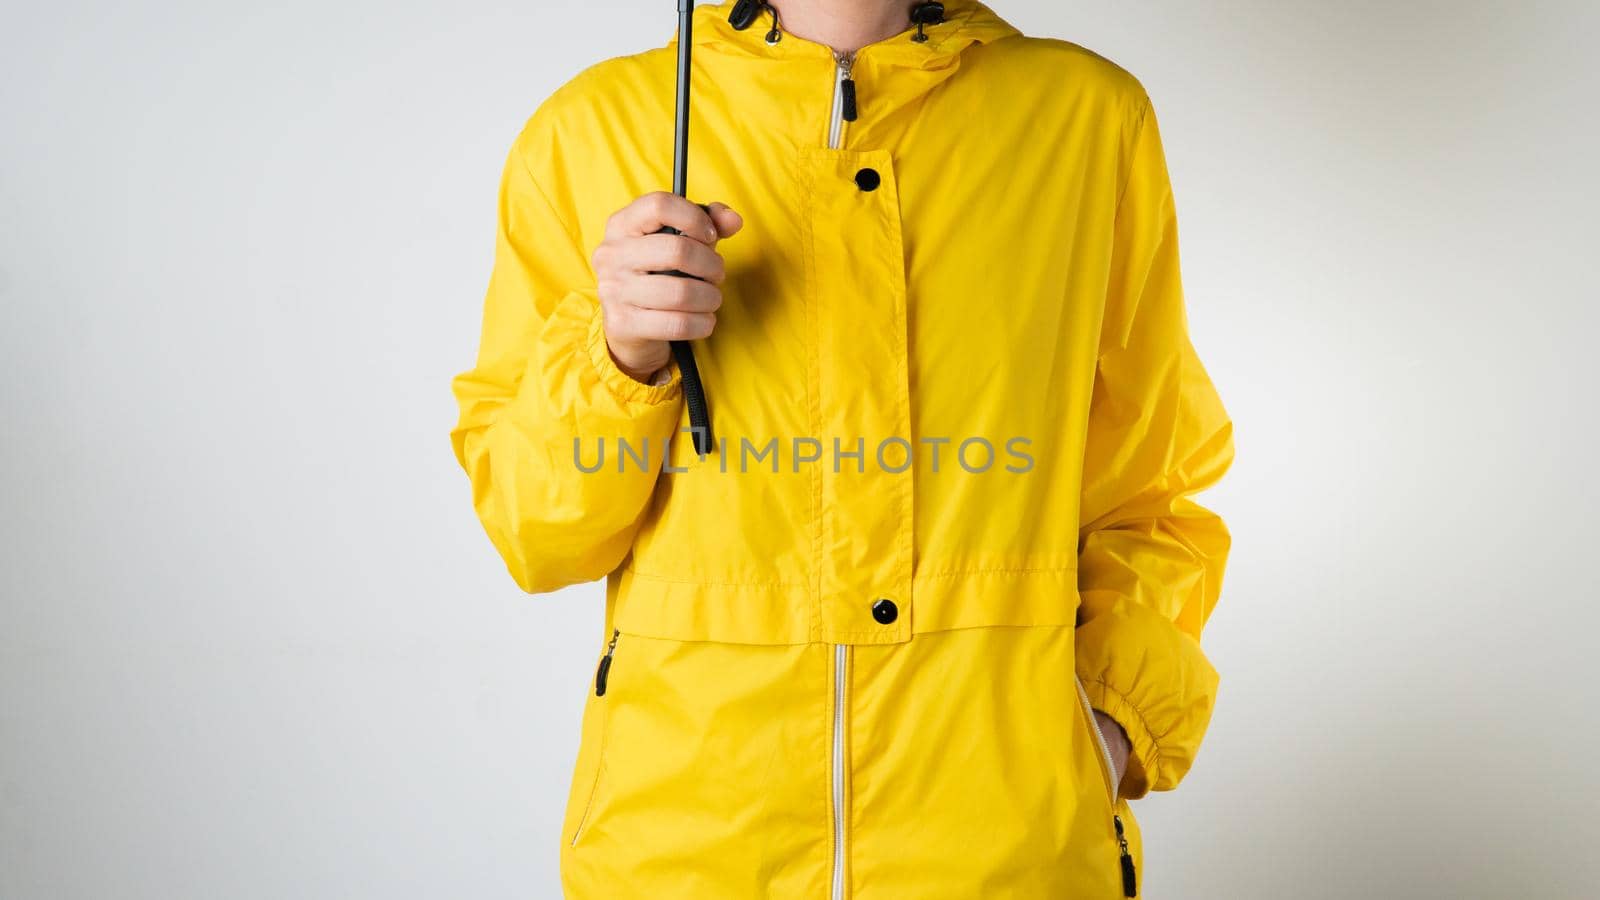 A woman in a yellow raincoat holds a black umbrella on a white background. High quality photo